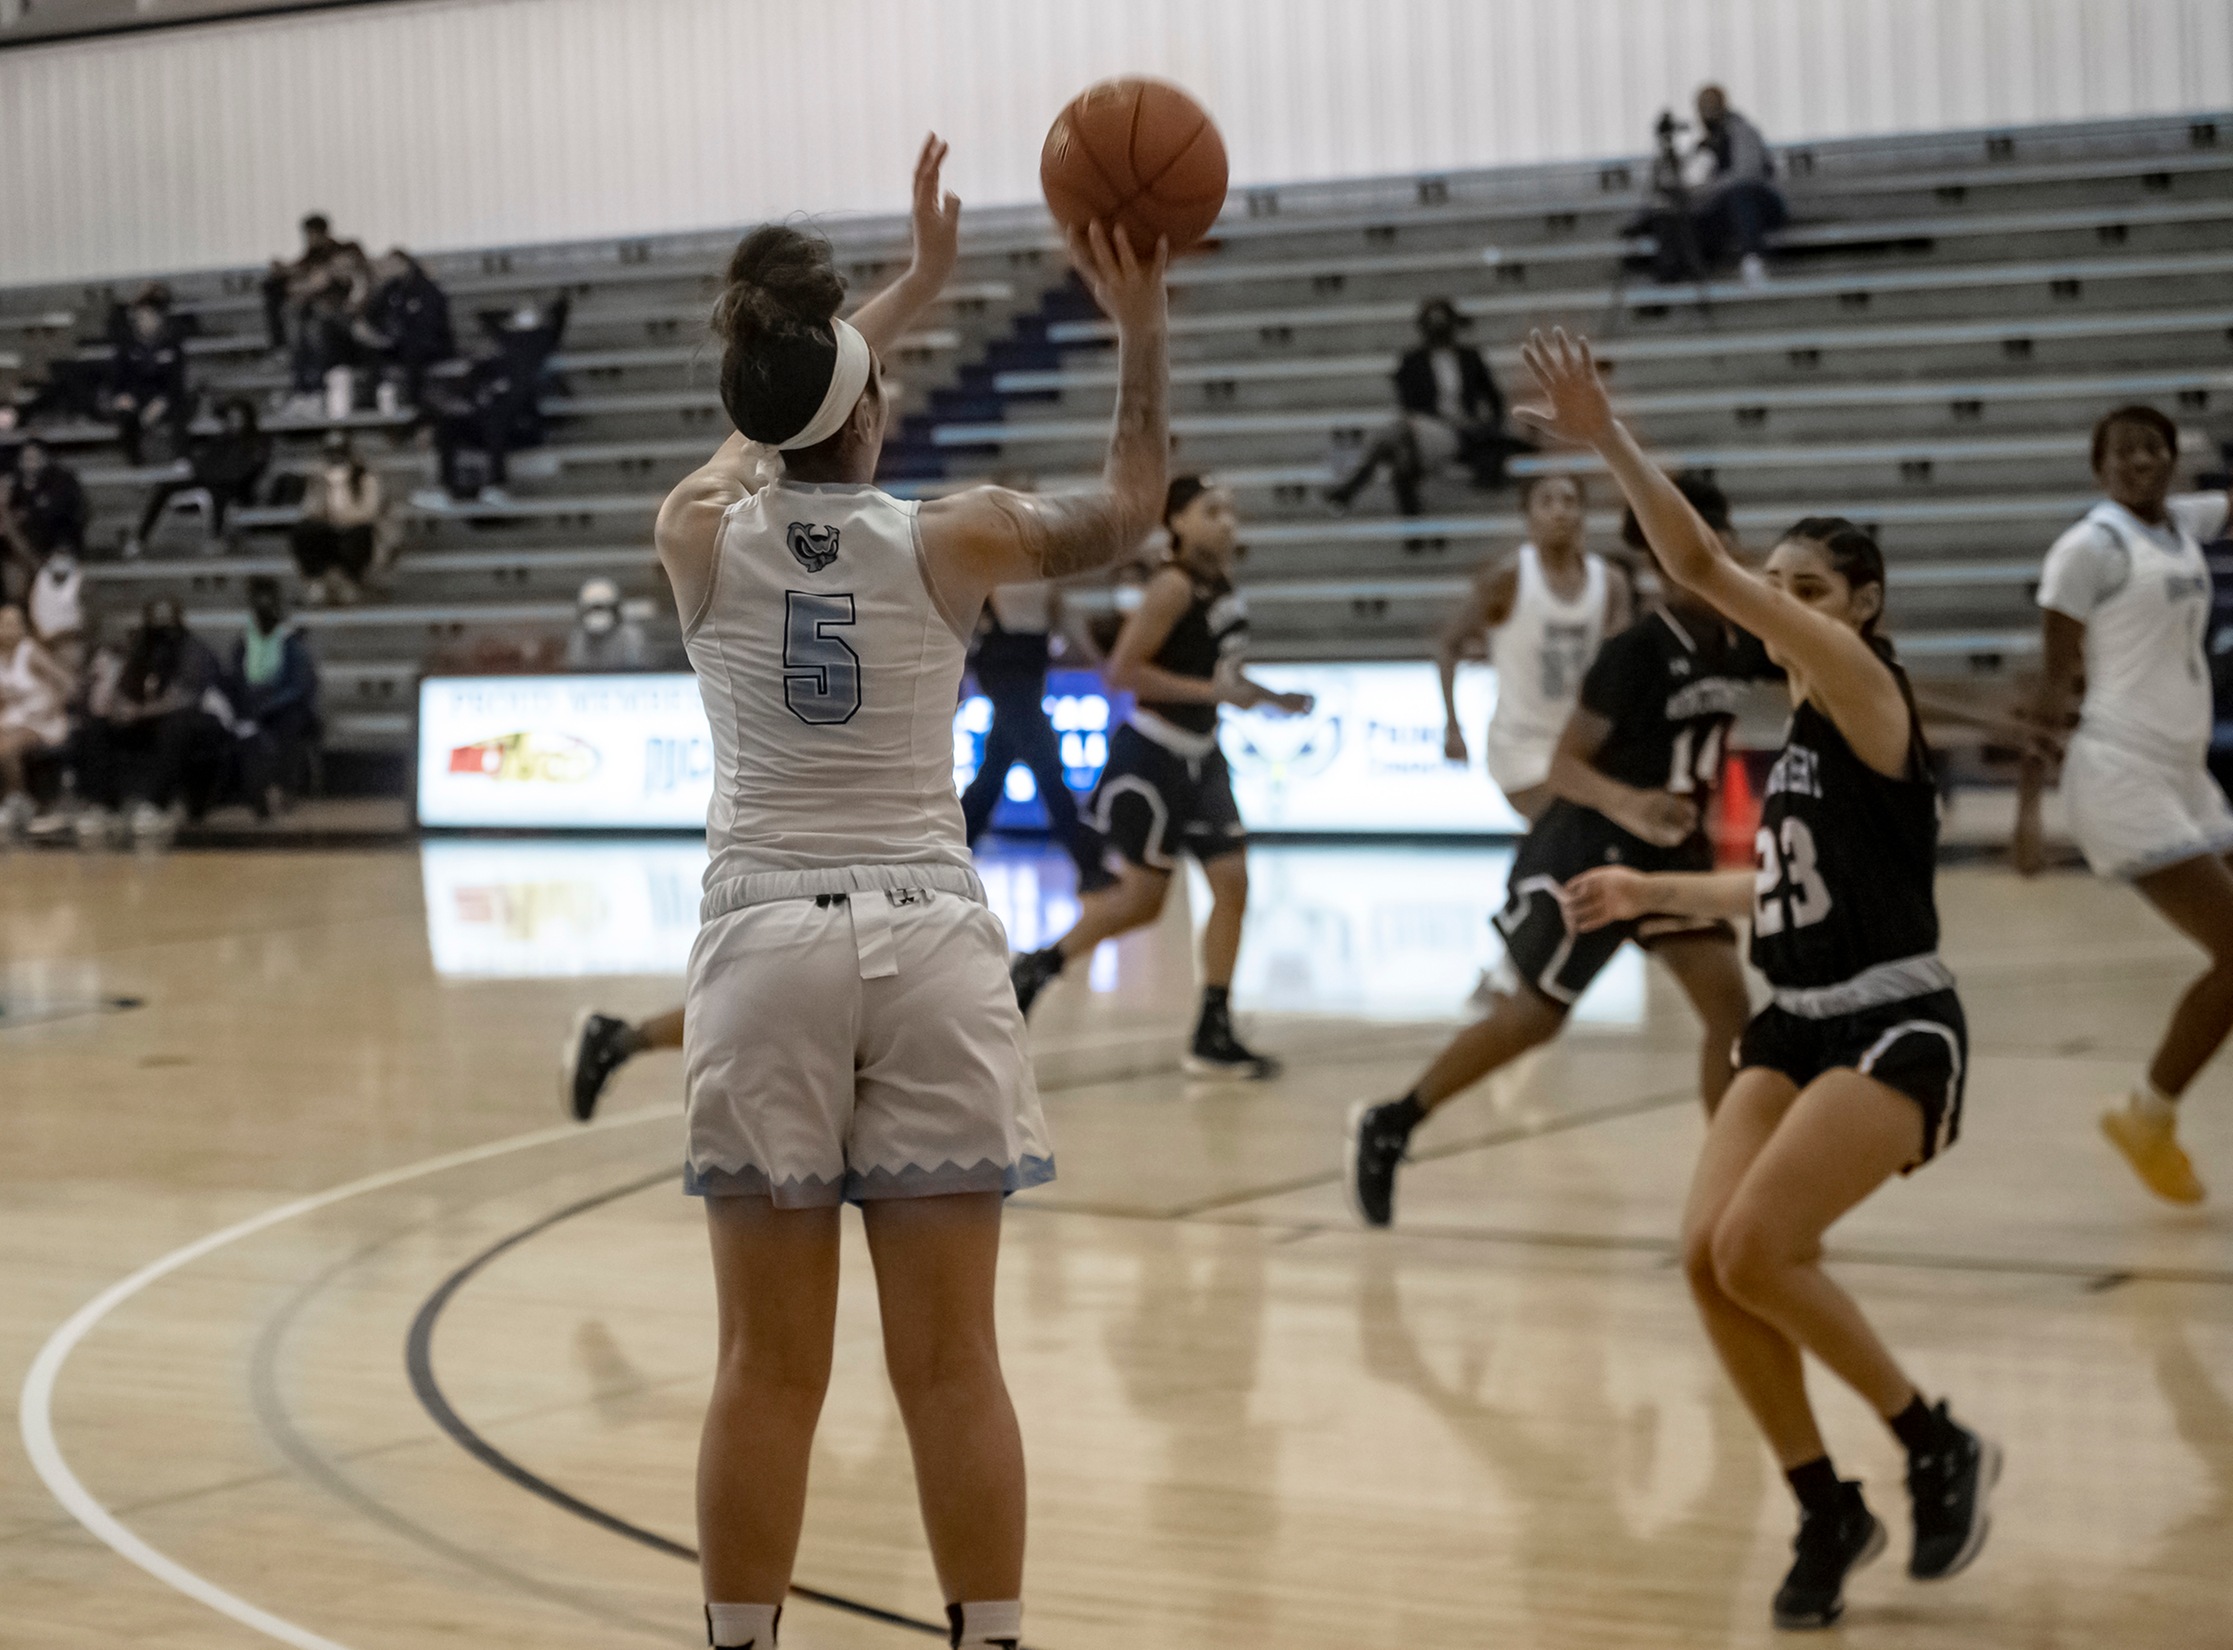 #10 Ranked Women’s Basketball Gets Back On Track With Win Over Hagerstown